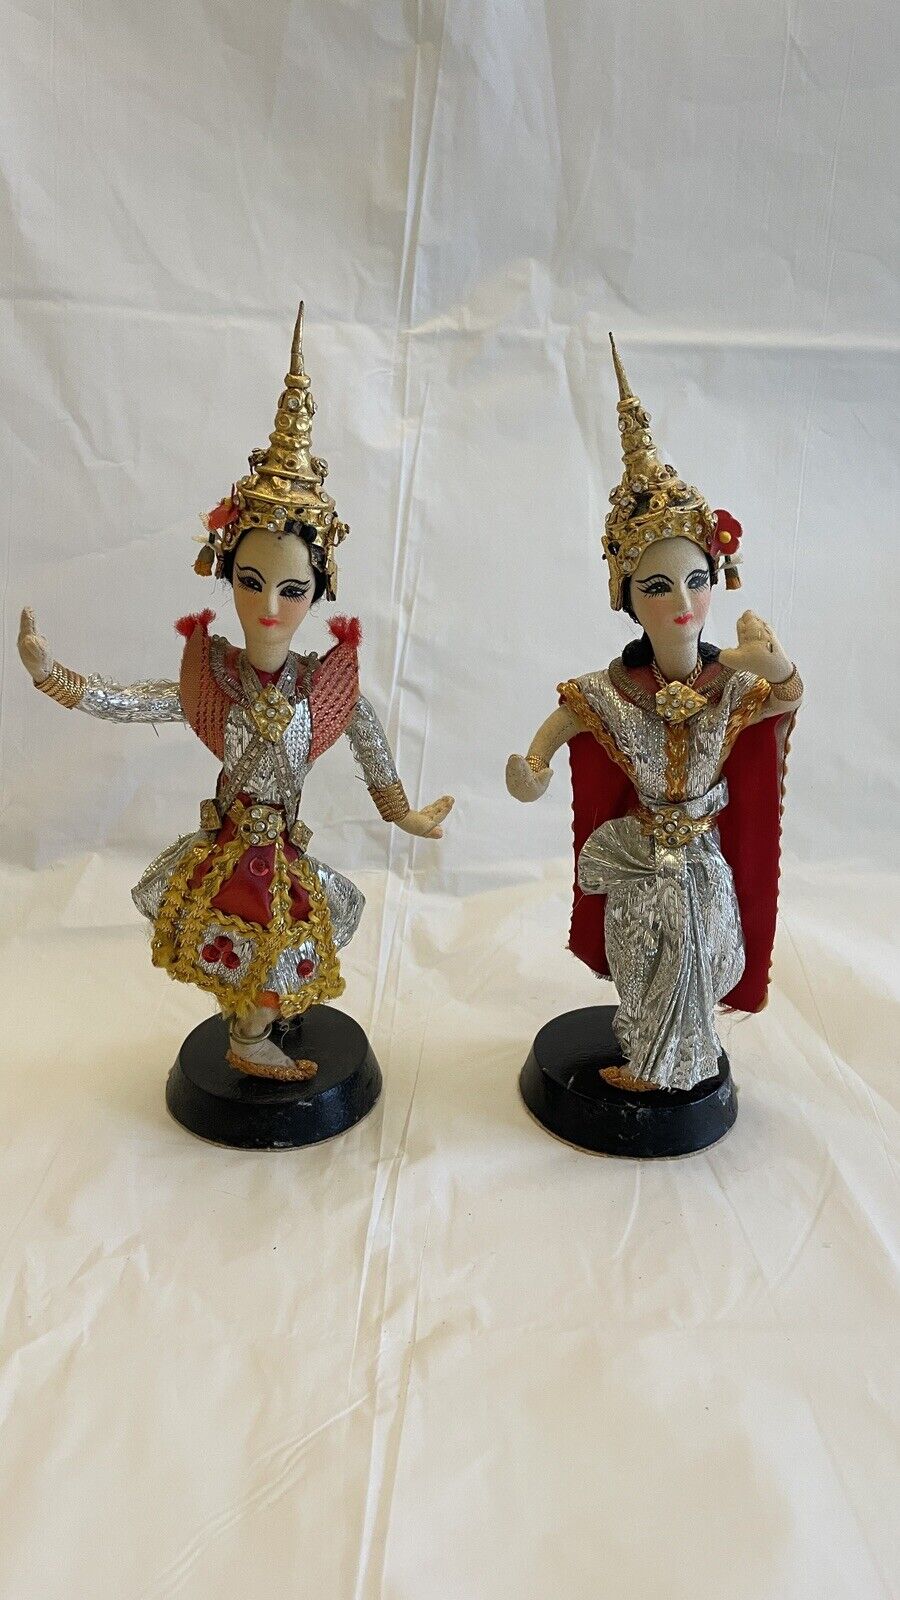 Vintage 1950s Handmade Thai Dancer Dolls in Traditional Costumes - Lot Of 2